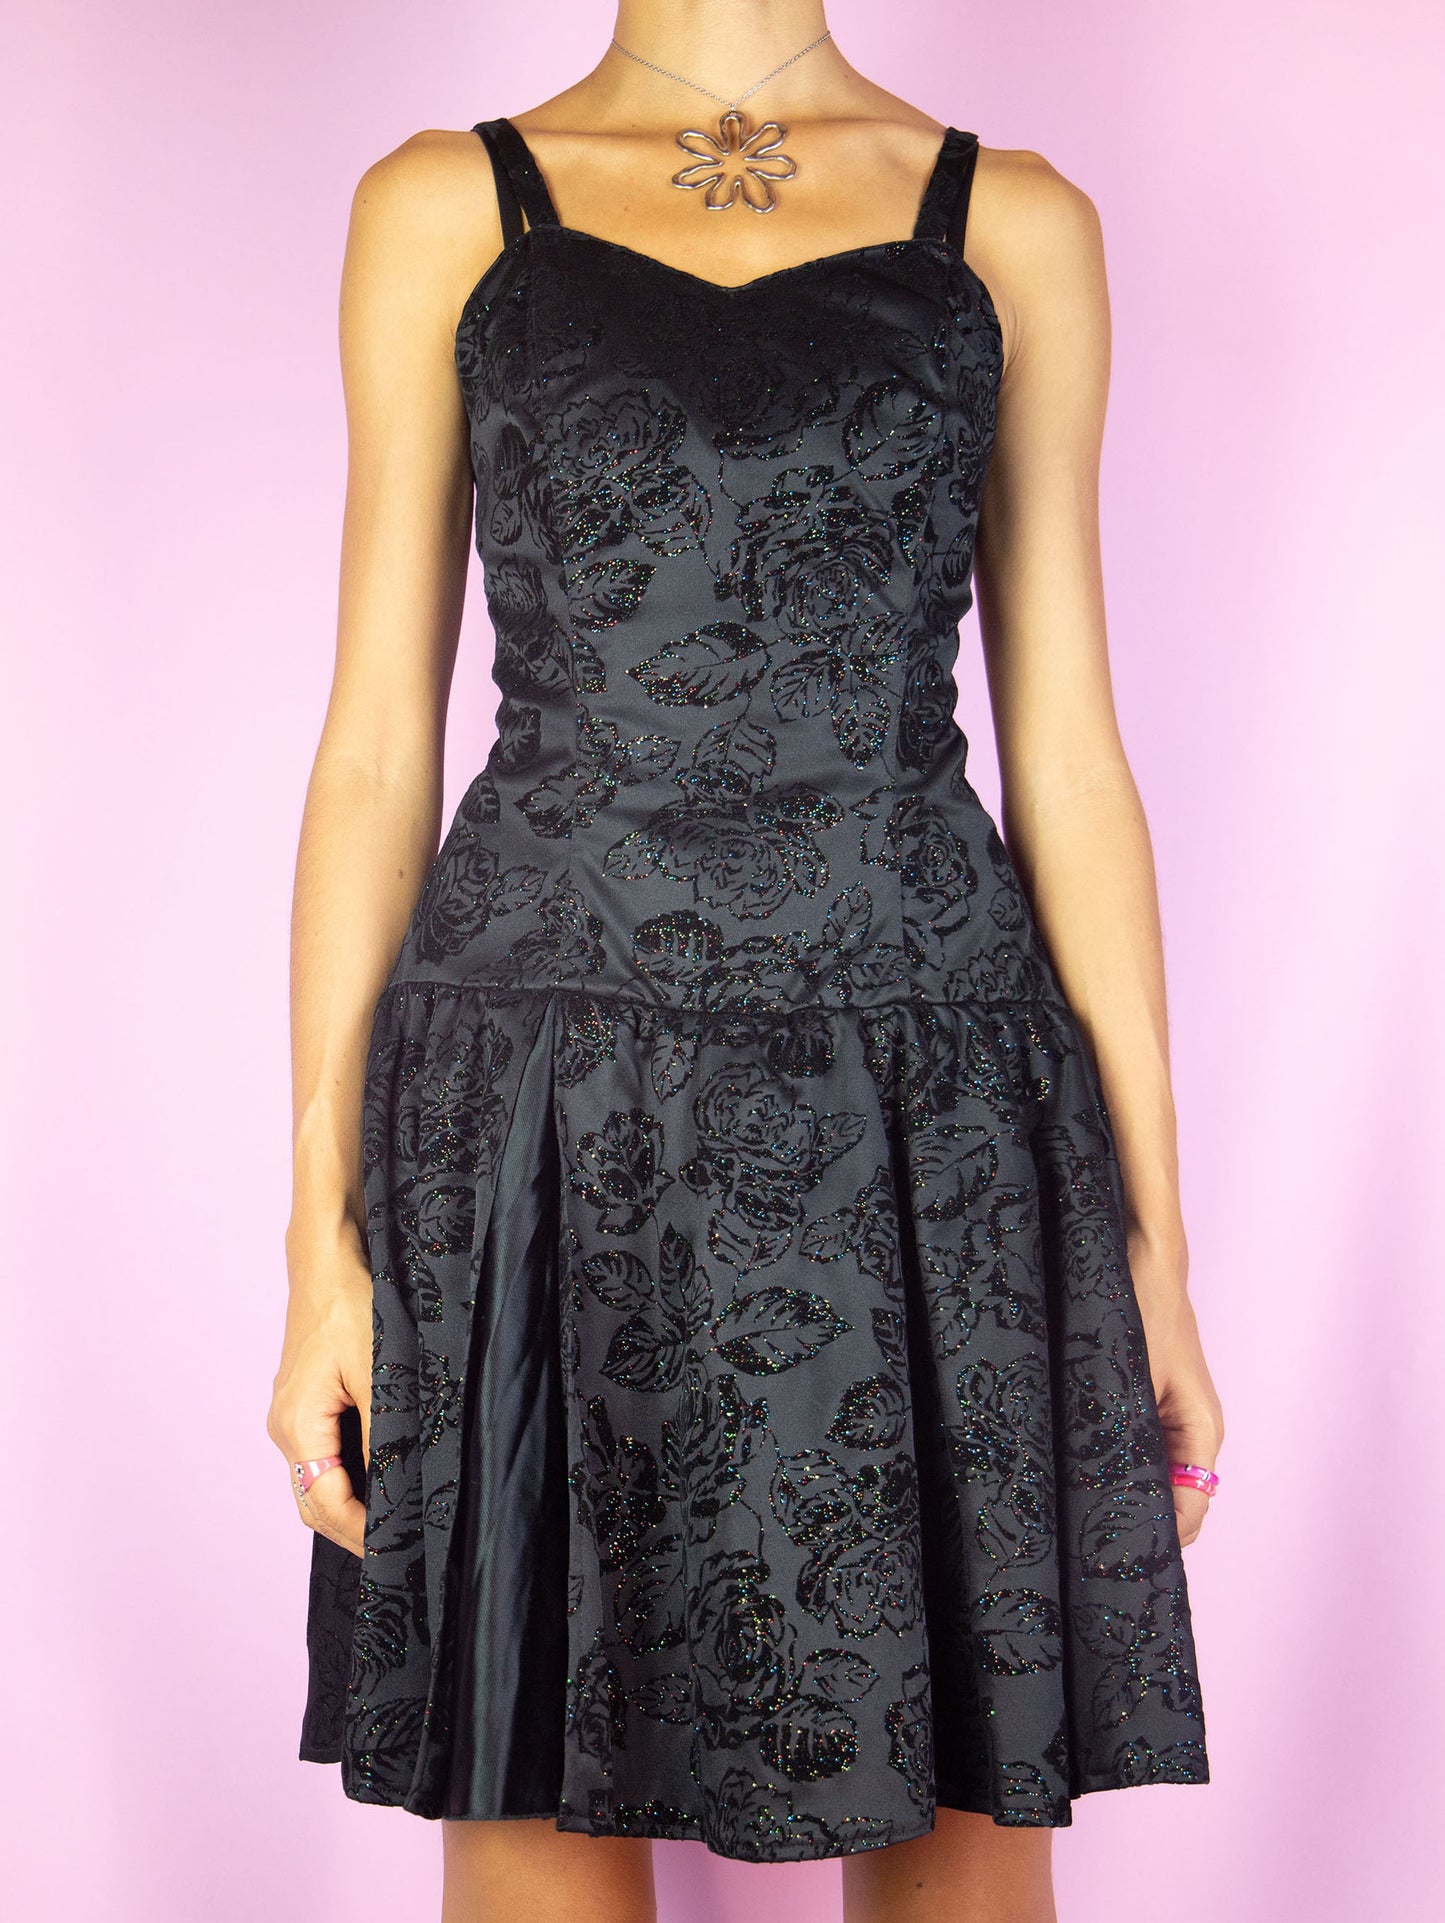 The Vintage 90s Black Party Mini Dress is a sleeveless black dress with a shirred back with a zipper closure and velvet rose floral details and muticolor sparkly glitter. Whimsygoth 1990s night dress.